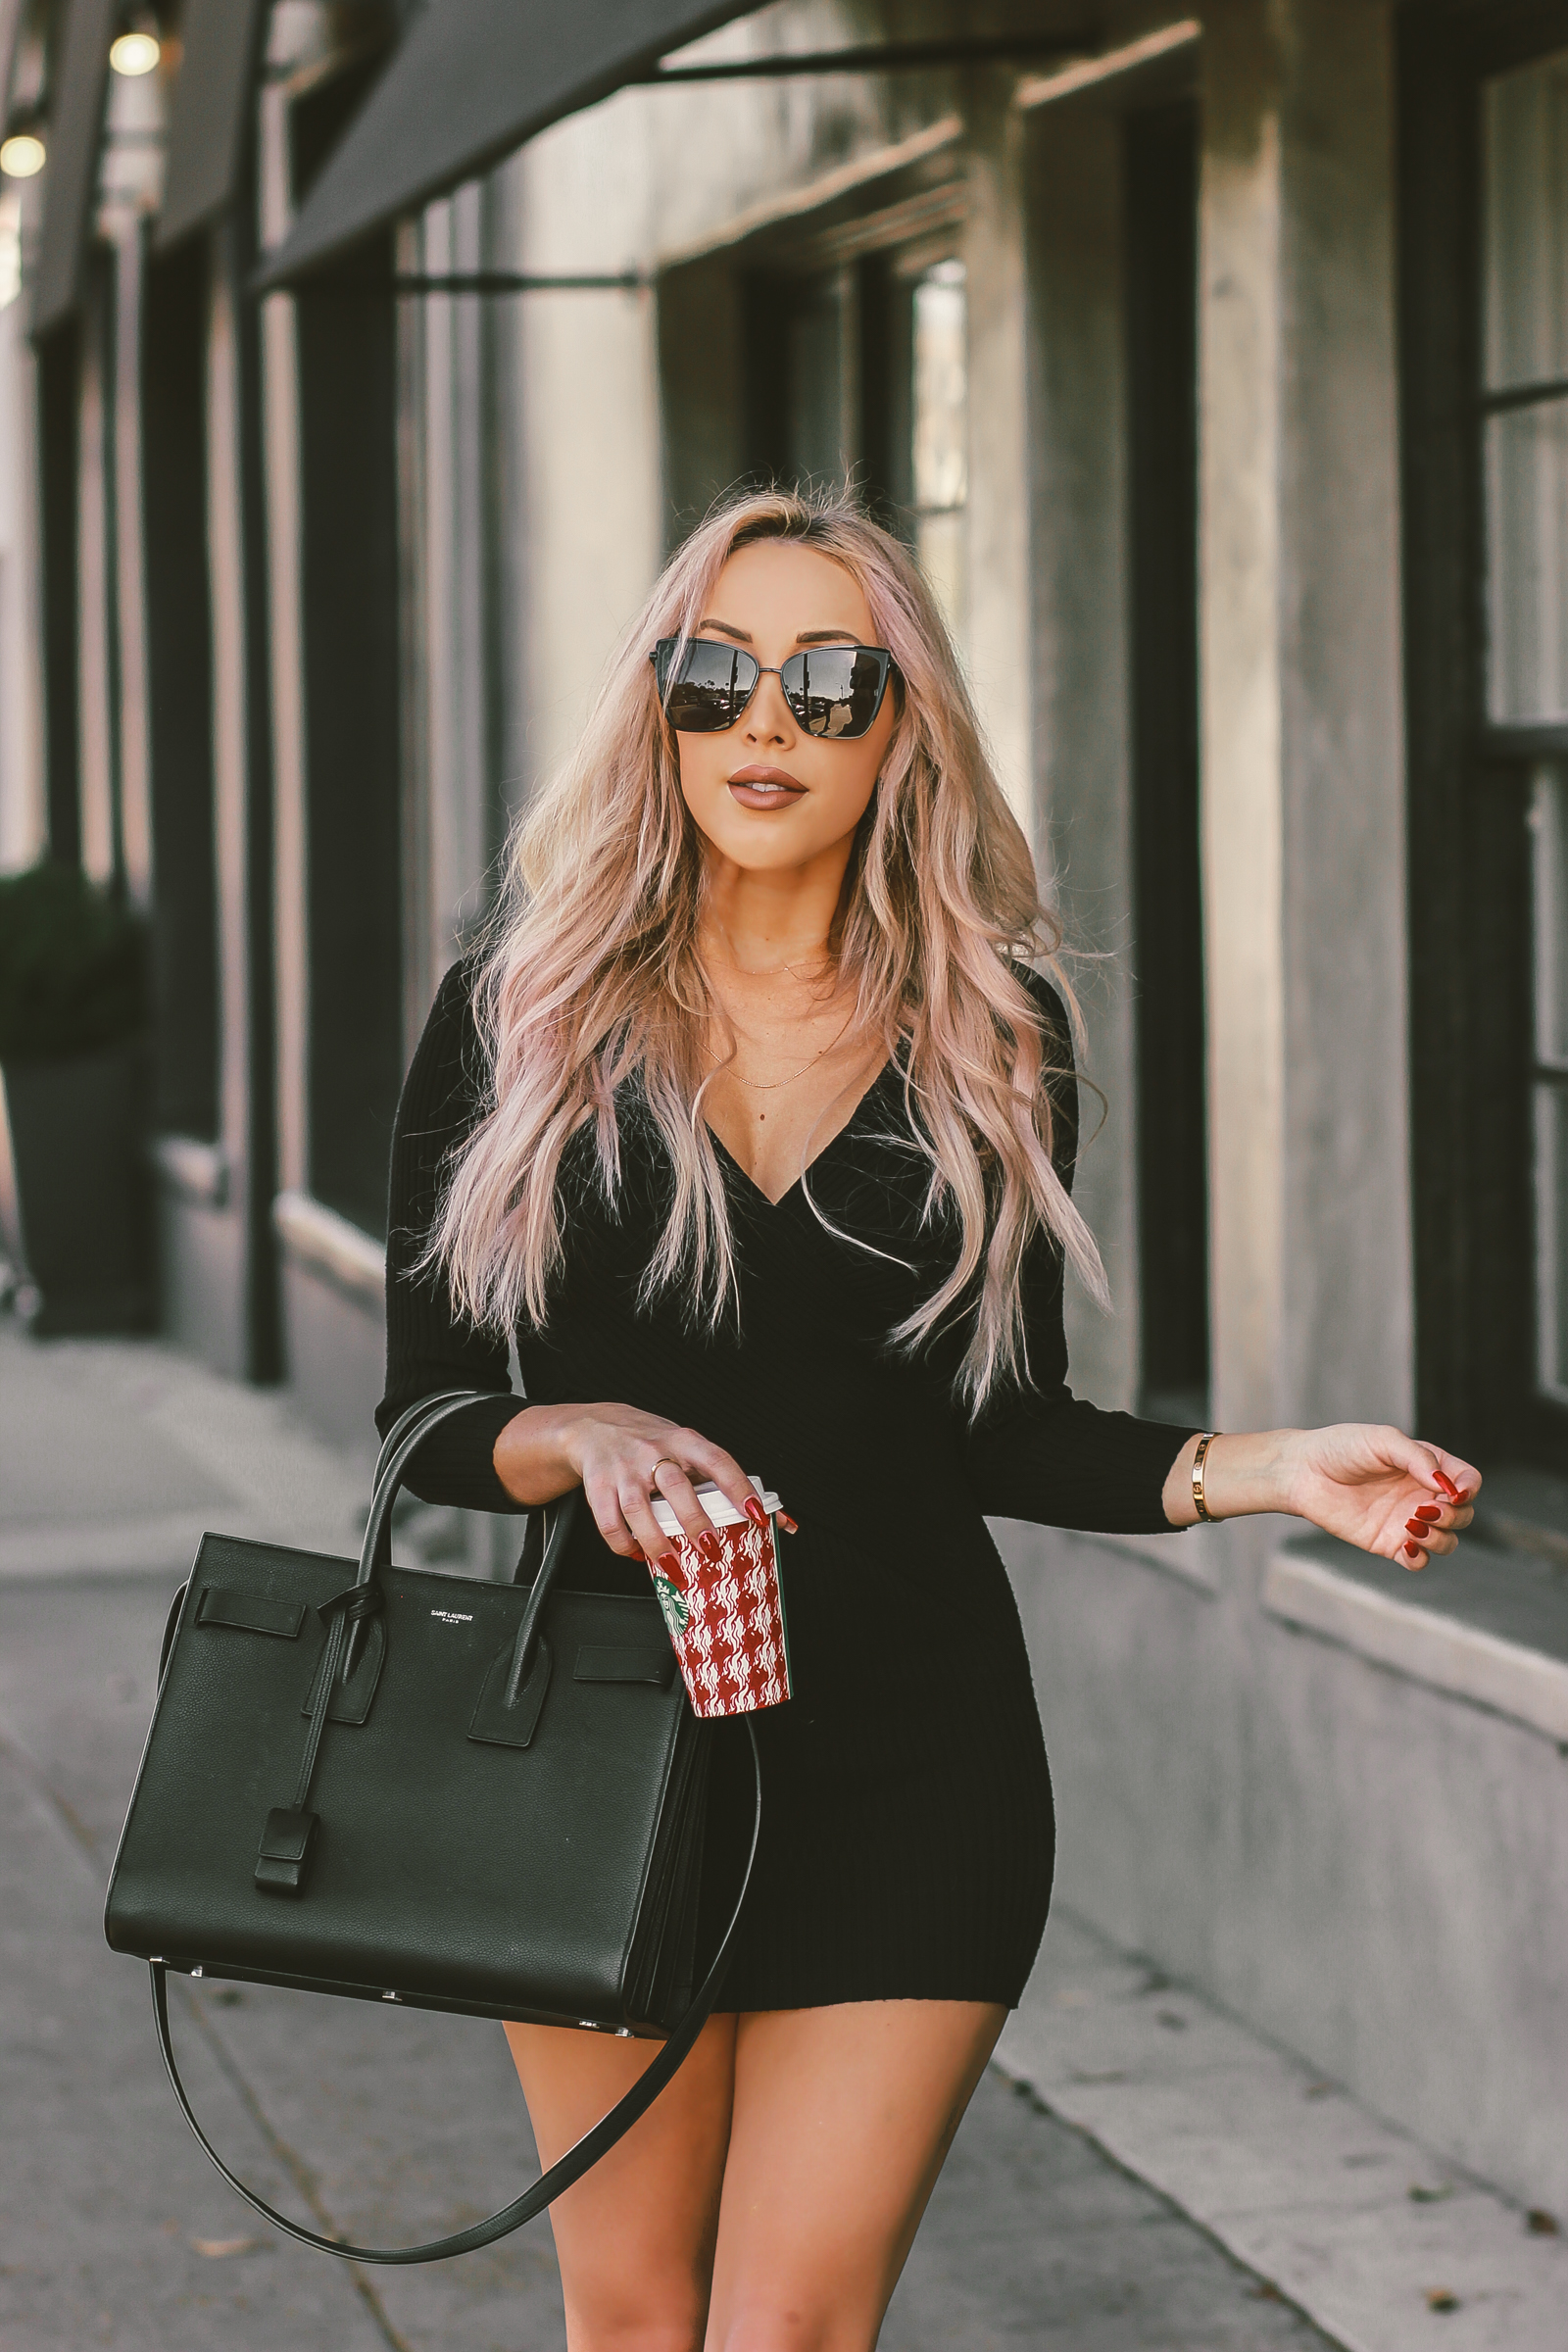 Black Sweater Dress for the Holiday's | Black Saint Laurent | Fall Fashion | Winter Fashion in LA | Saint Laurent Sac De Jour | Louboutins | Blondie in the City by Hayley Larue